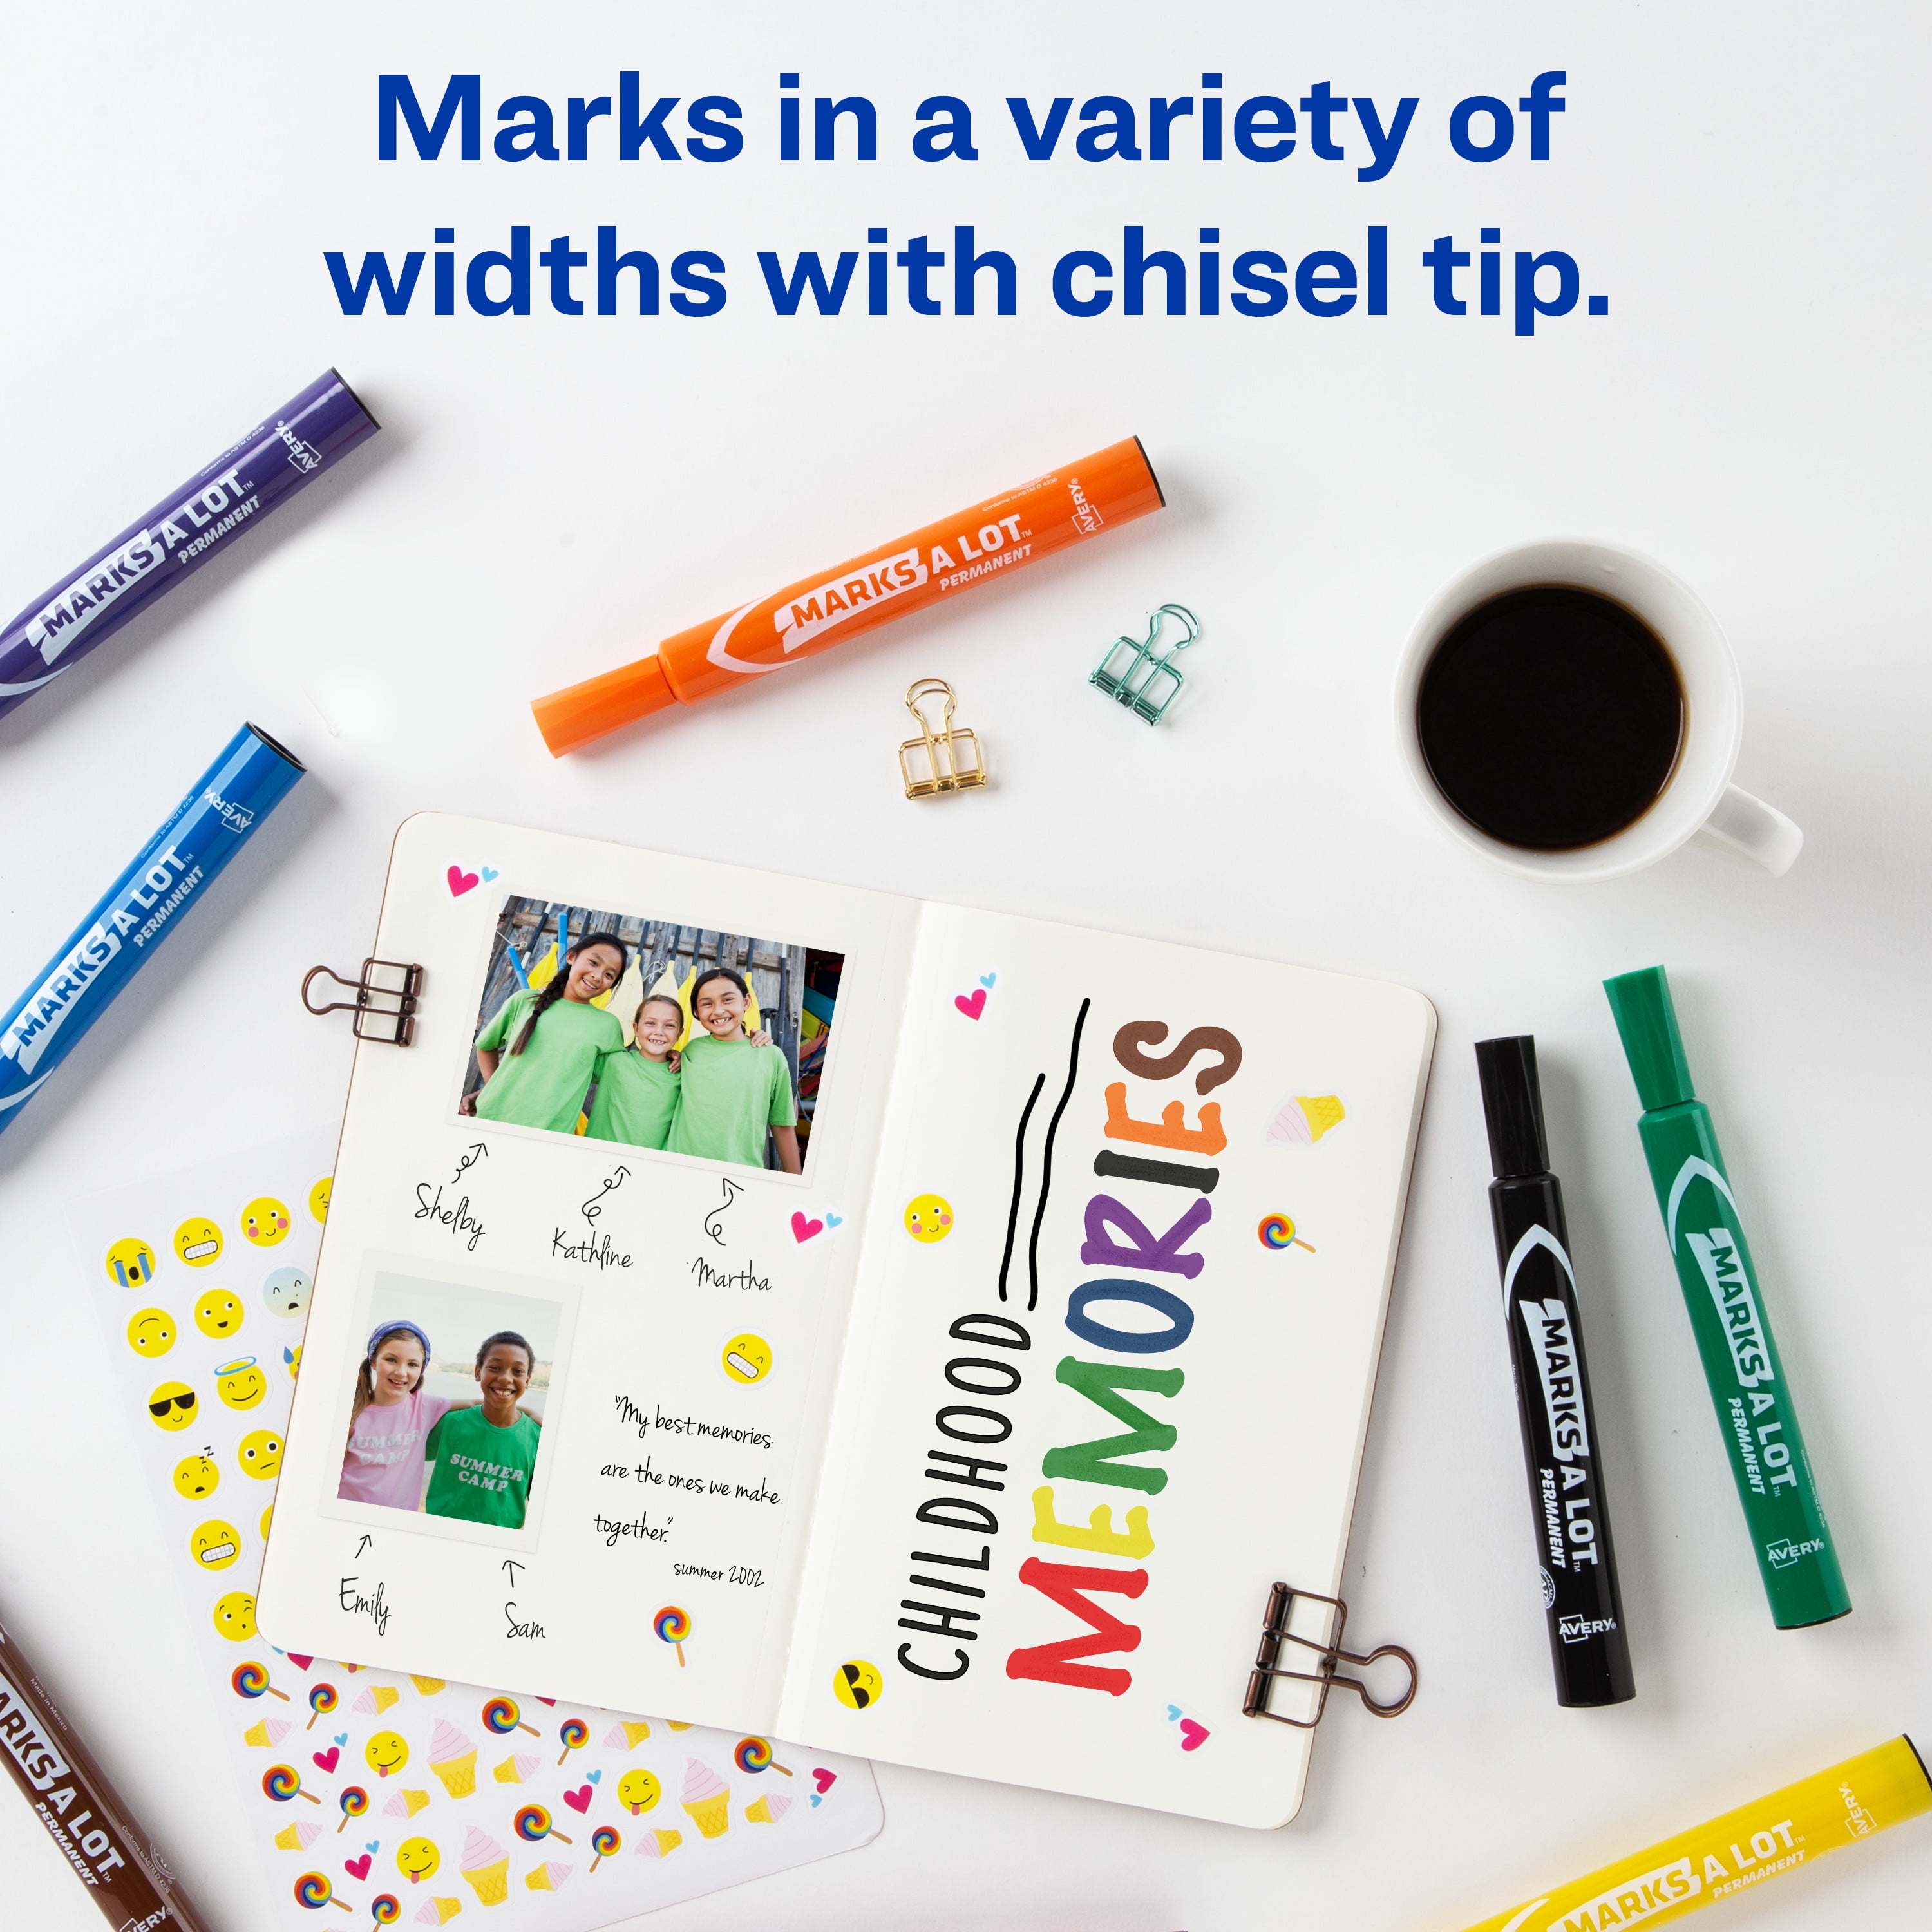 Avery® Marks-A-Lot® Ultra Fine Permanent Markers, 12 Blue Markers